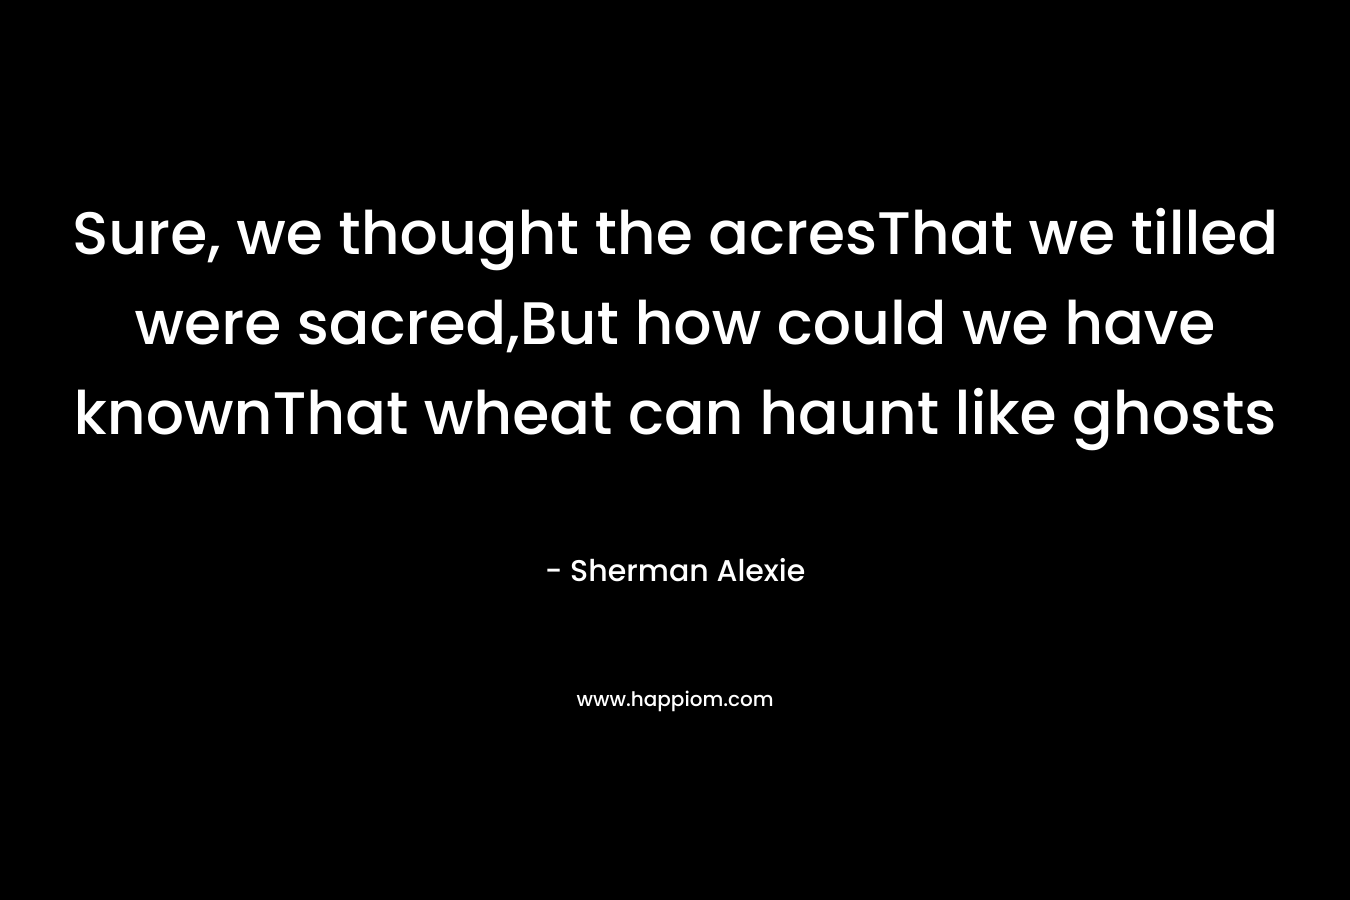 Sure, we thought the acresThat we tilled were sacred,But how could we have knownThat wheat can haunt like ghosts – Sherman Alexie